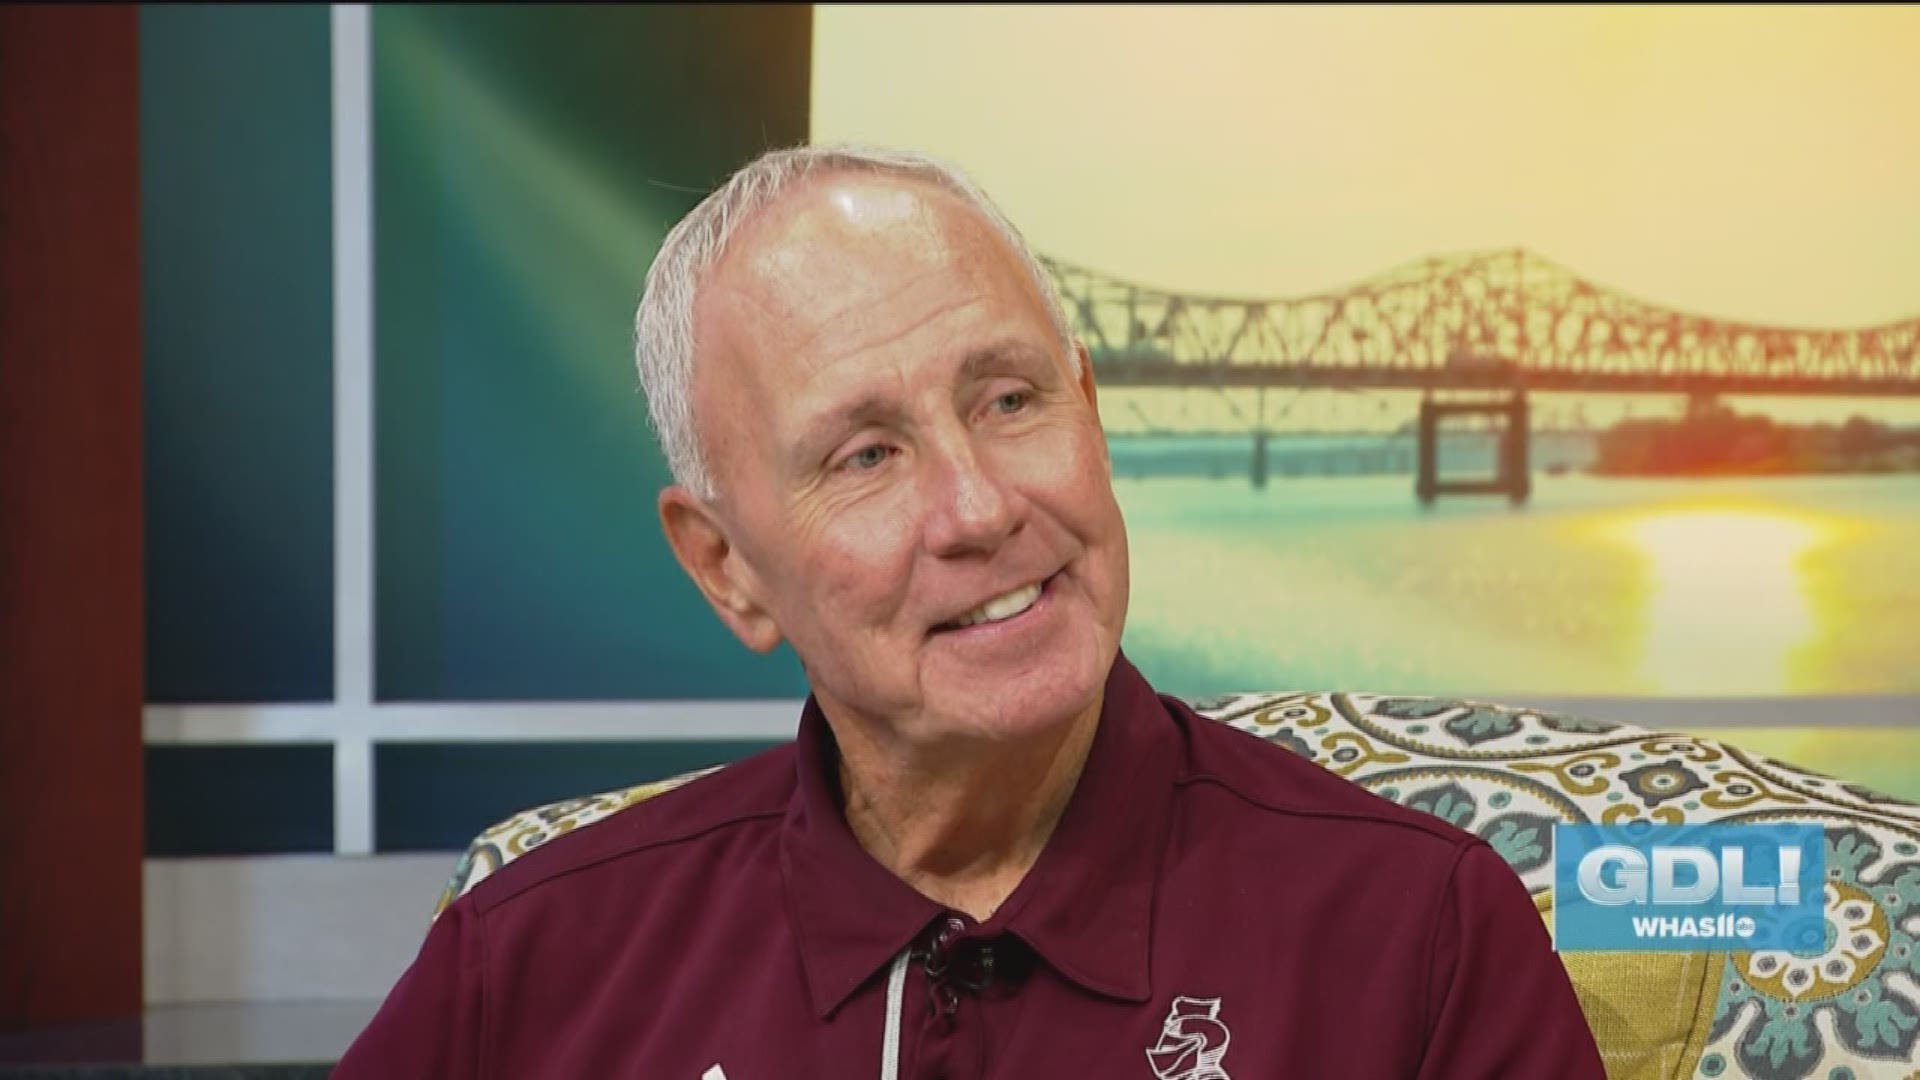 Bellarmine University head basketball coach Scott Davenport stopped by Great Day Live to talk about the team's invitation to join the Atlantic Sun Conference, running a youth basketball camp, his dramatic weight loss and the gratitude he has for life.